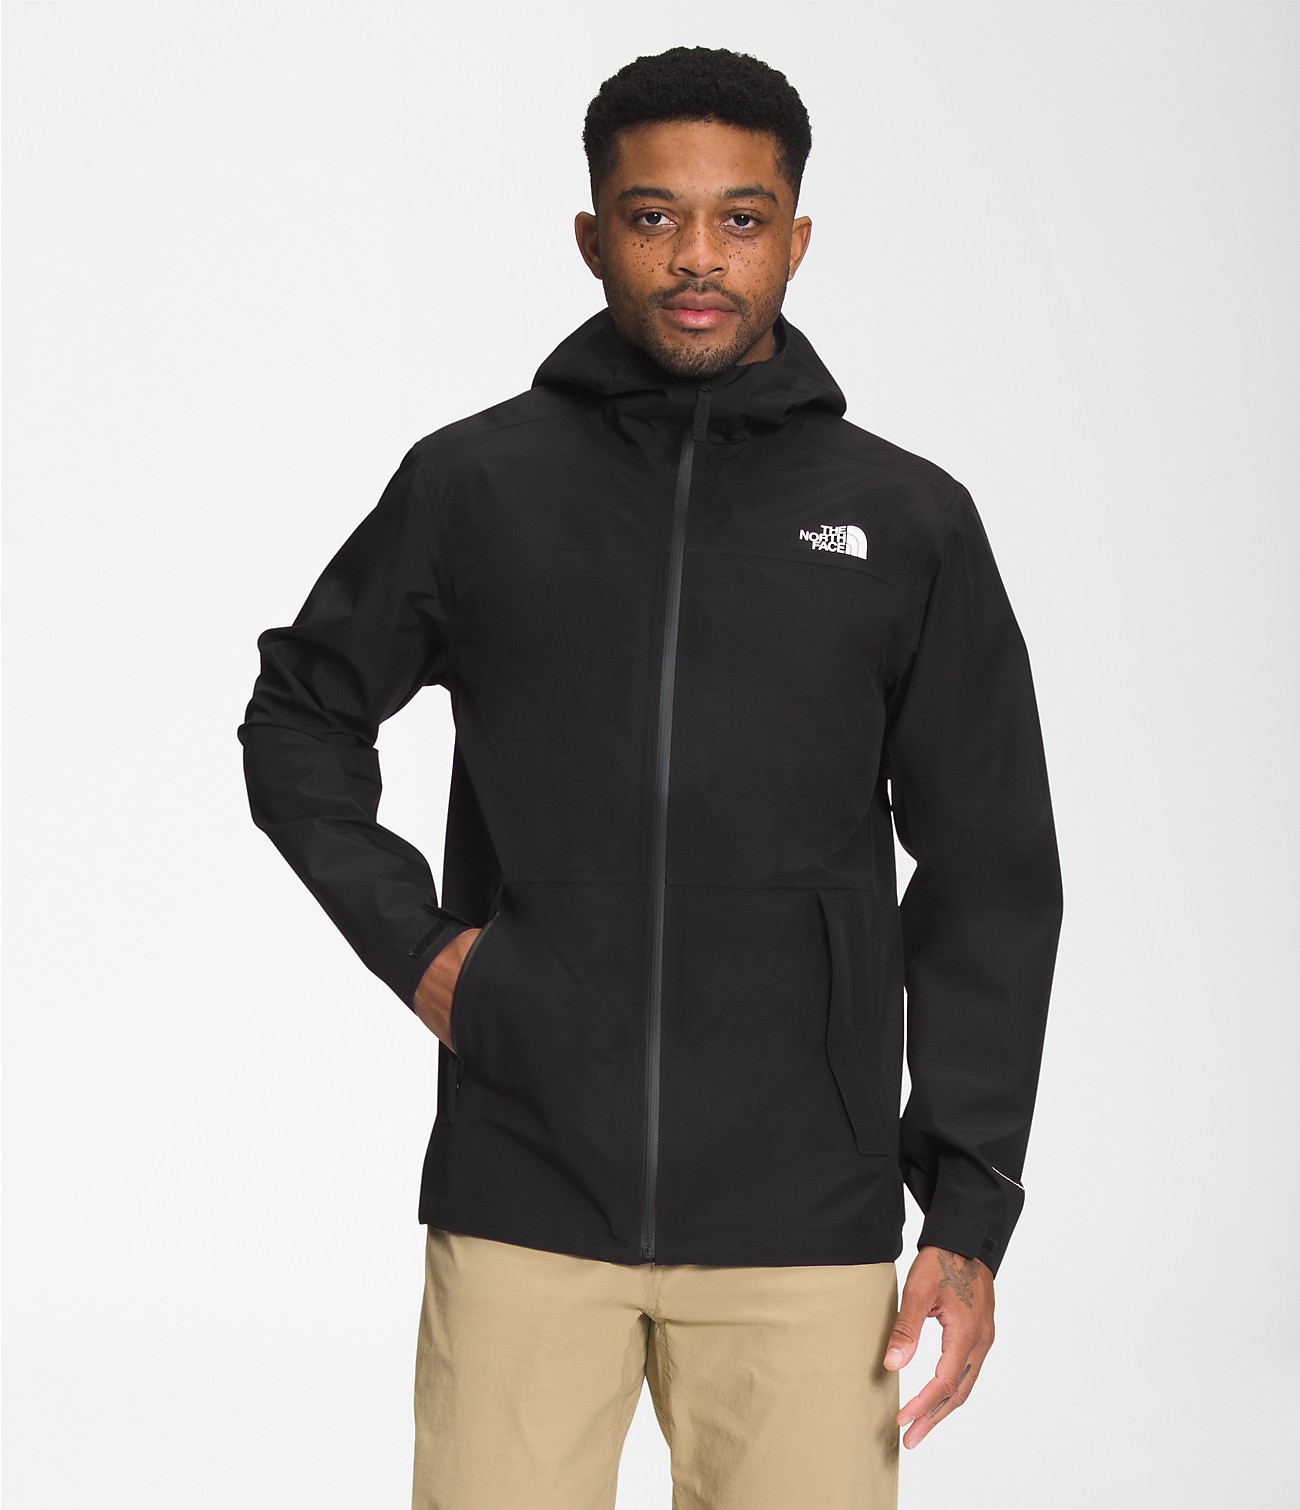 Unlock Wilderness' choice in the Stone Island Vs North Face comparison, the Dryzzle FUTURELIGHT™ Jacket by The North Face